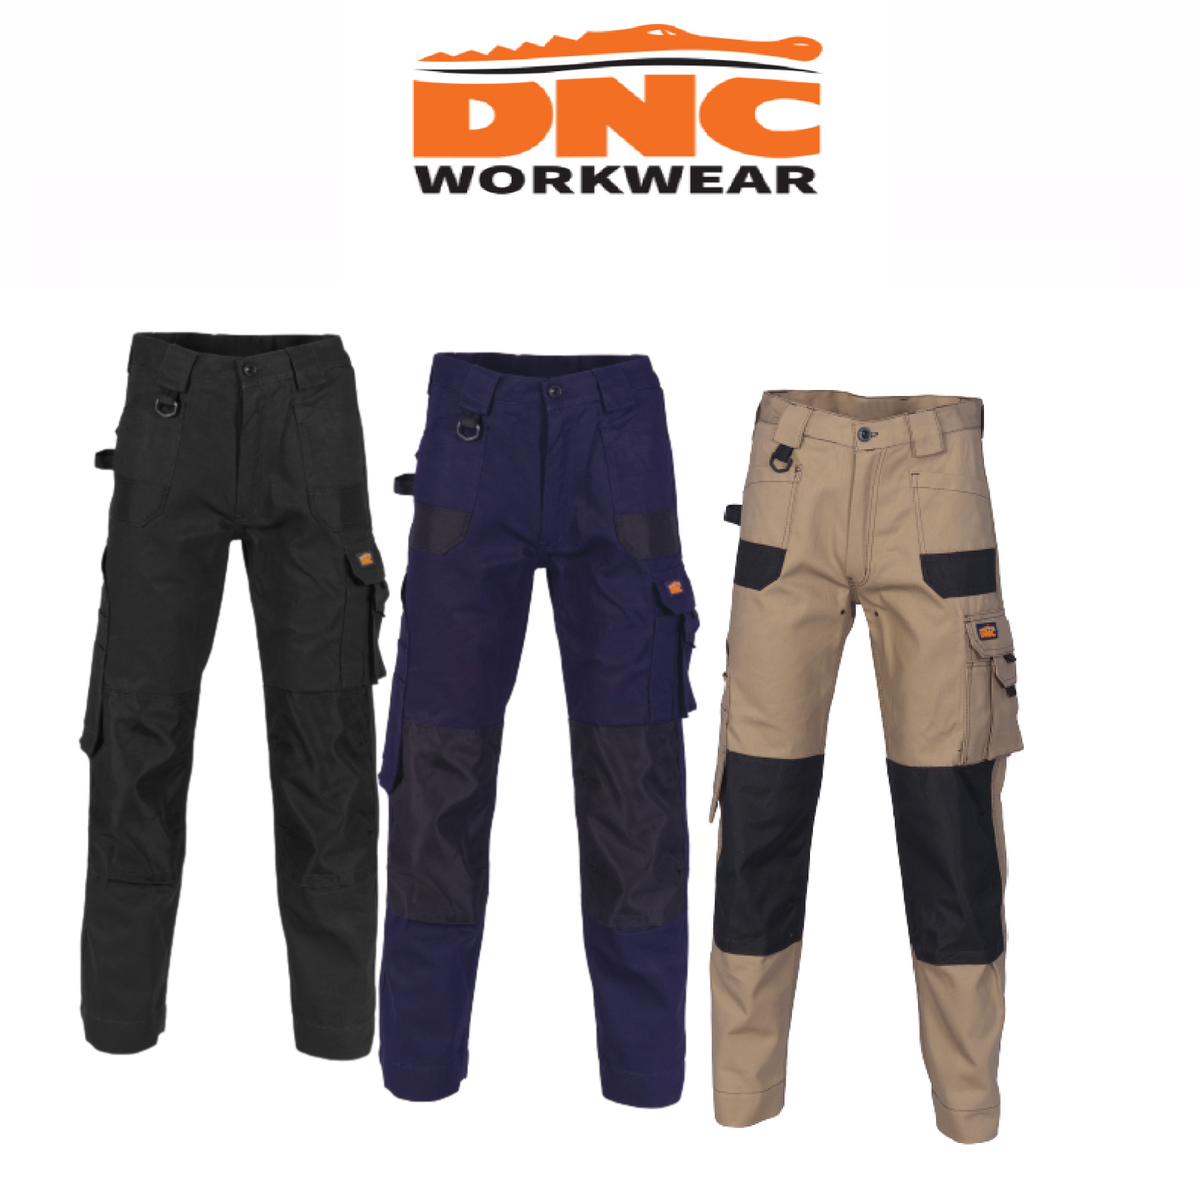 DNC Workwear Duratex Cotton Duck Weave Cargo Pants Work Safety Pant 3335